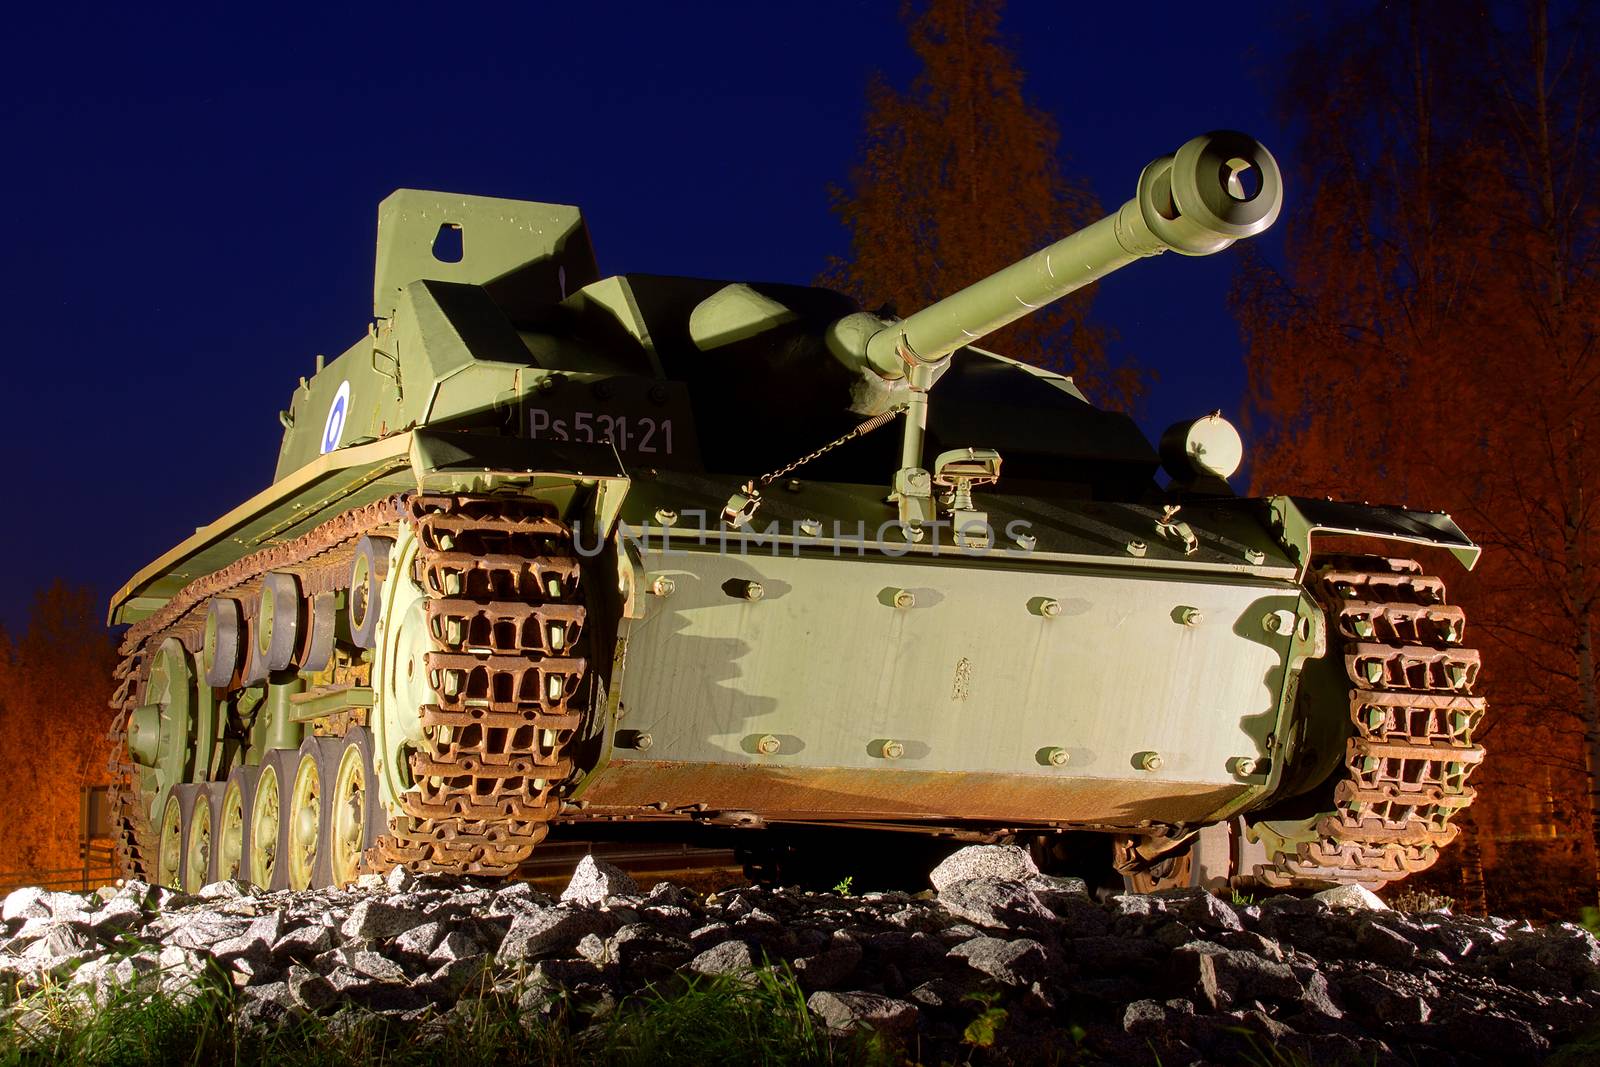 Lighted old tank at the top of the hill at night